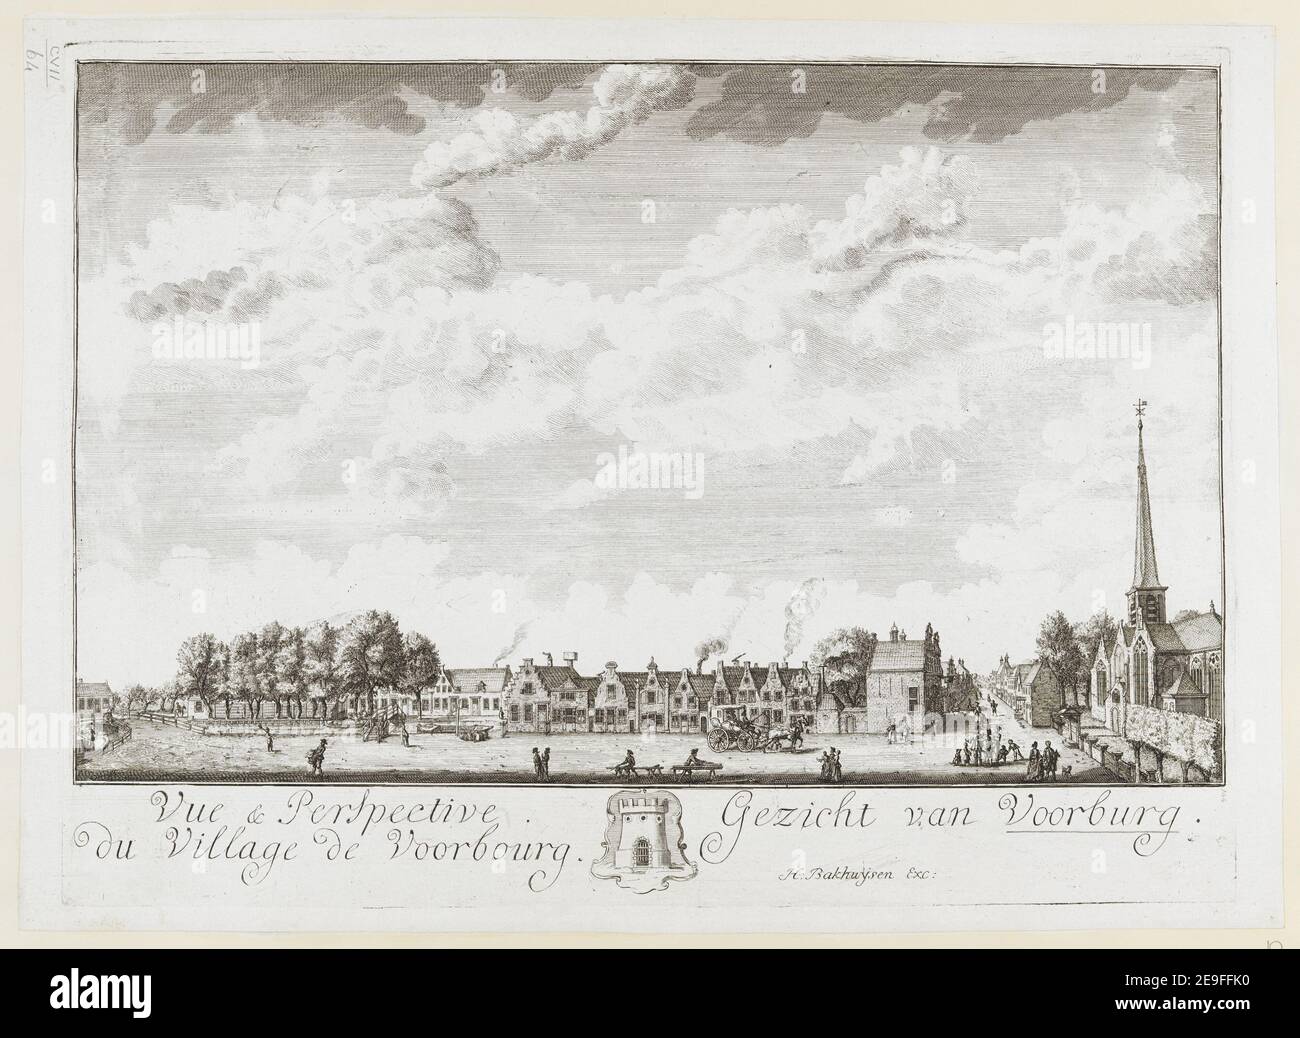 Vue & Perspective du Village de Voorburg = Gezicht van Voorburg. Author  Besoet, I. V. 107.64. Place of publication: [The Hague] Publisher: H. BakhuyÃàsen Excudit, Date of publication: [about 1760]  Item type: 1 print Medium: etching and engraving Dimensions: platemark 30.3 x 41 cm, on sheet 32 x 44.3 cm  Former owner: George III, King of Great Britain, 1738-1820 Stock Photo